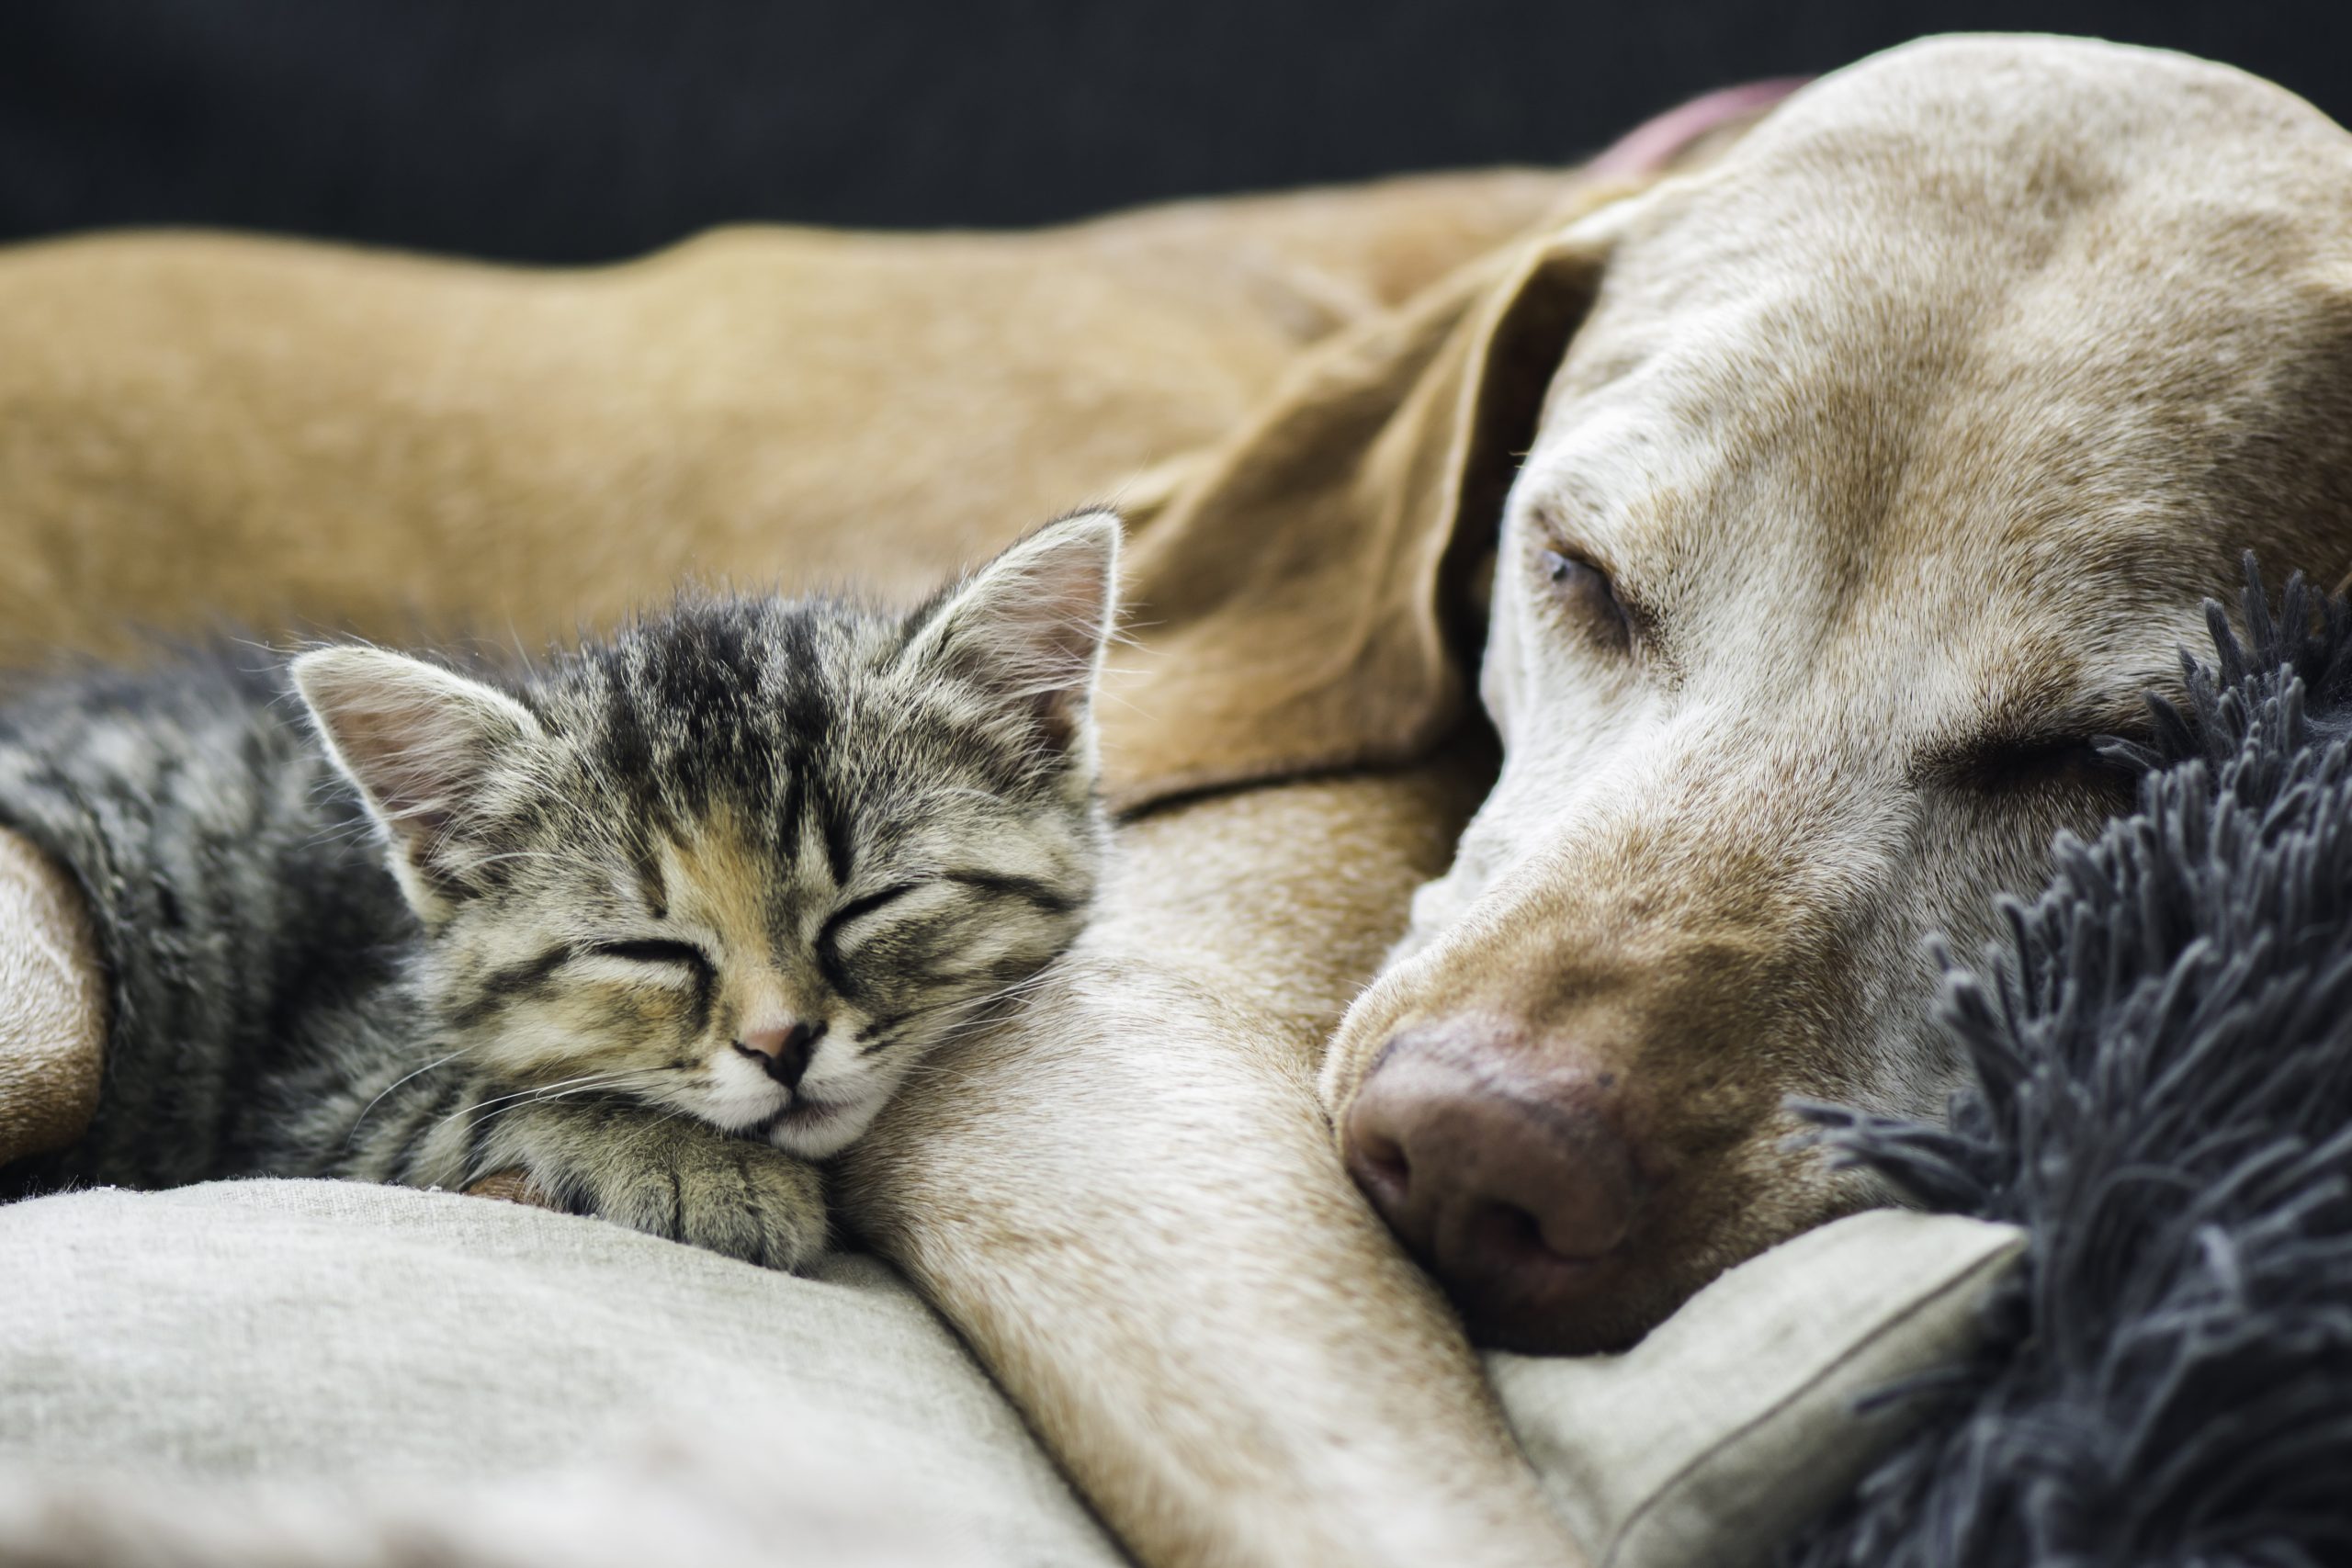 More Sleep for Dogs and Cats